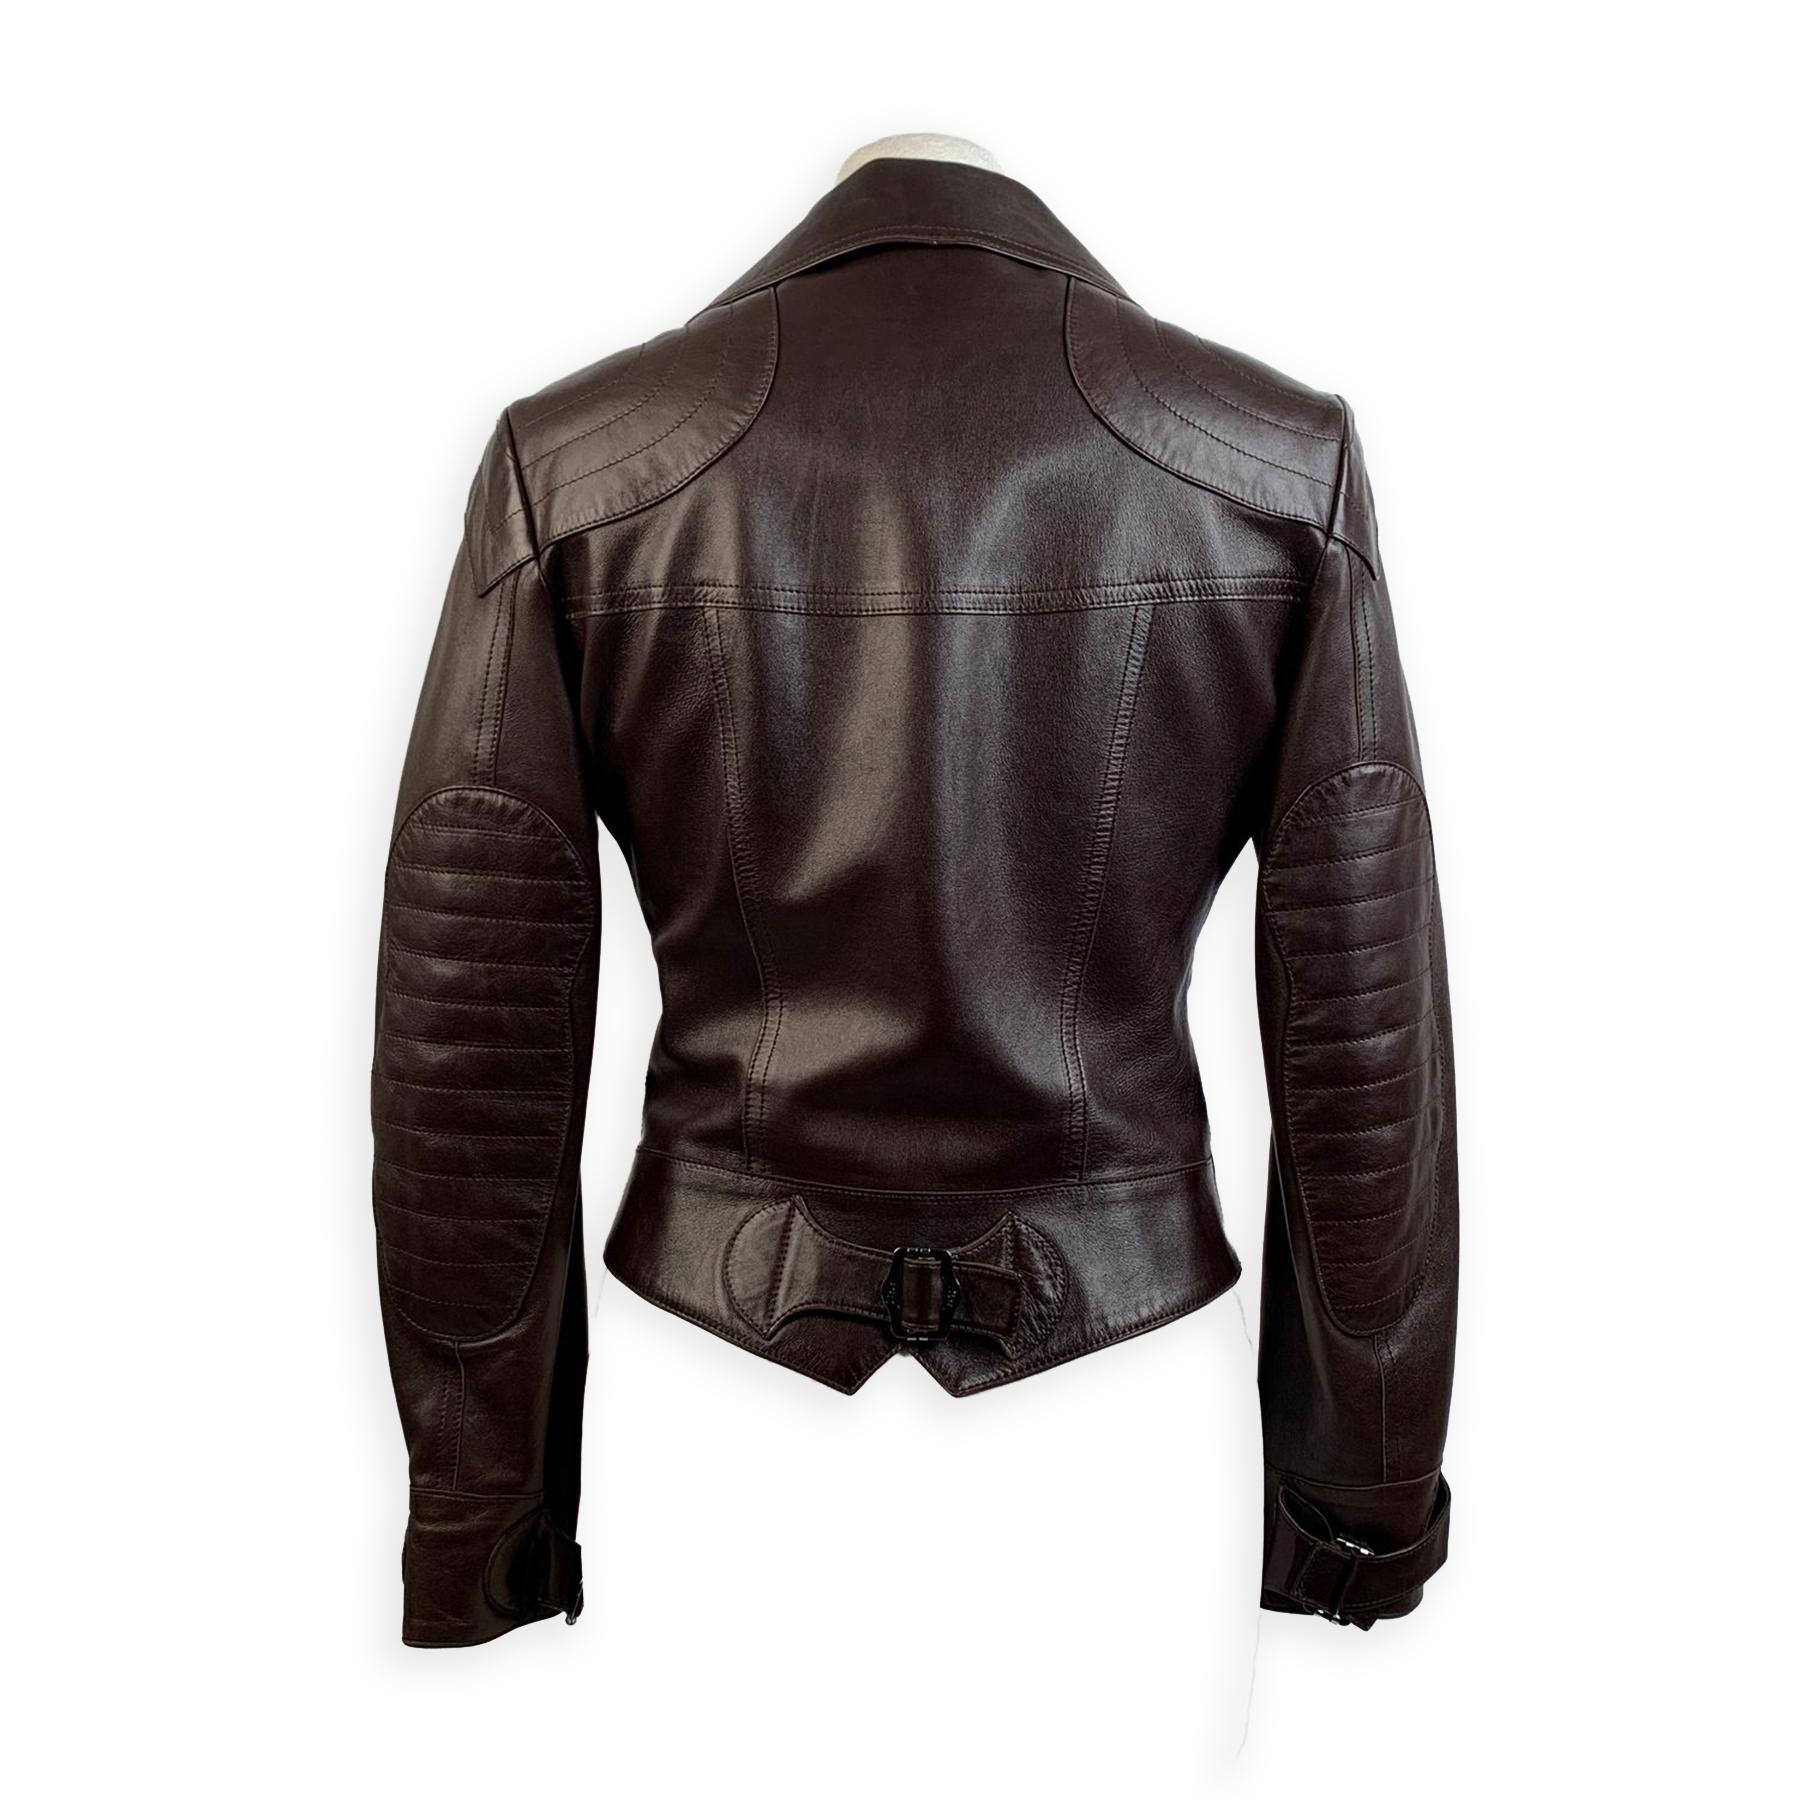 - Christian Dior Biker Style Jacket
- Brown lambskin leather
- Front zip closure on the front
- Long sleeve styling with buckles cuffs
- Zip pockets on the front
- Silk lining
- Size: 36 FR, 8 GB, 34 D, 4 USA. It should correspond to a SMALL size
-